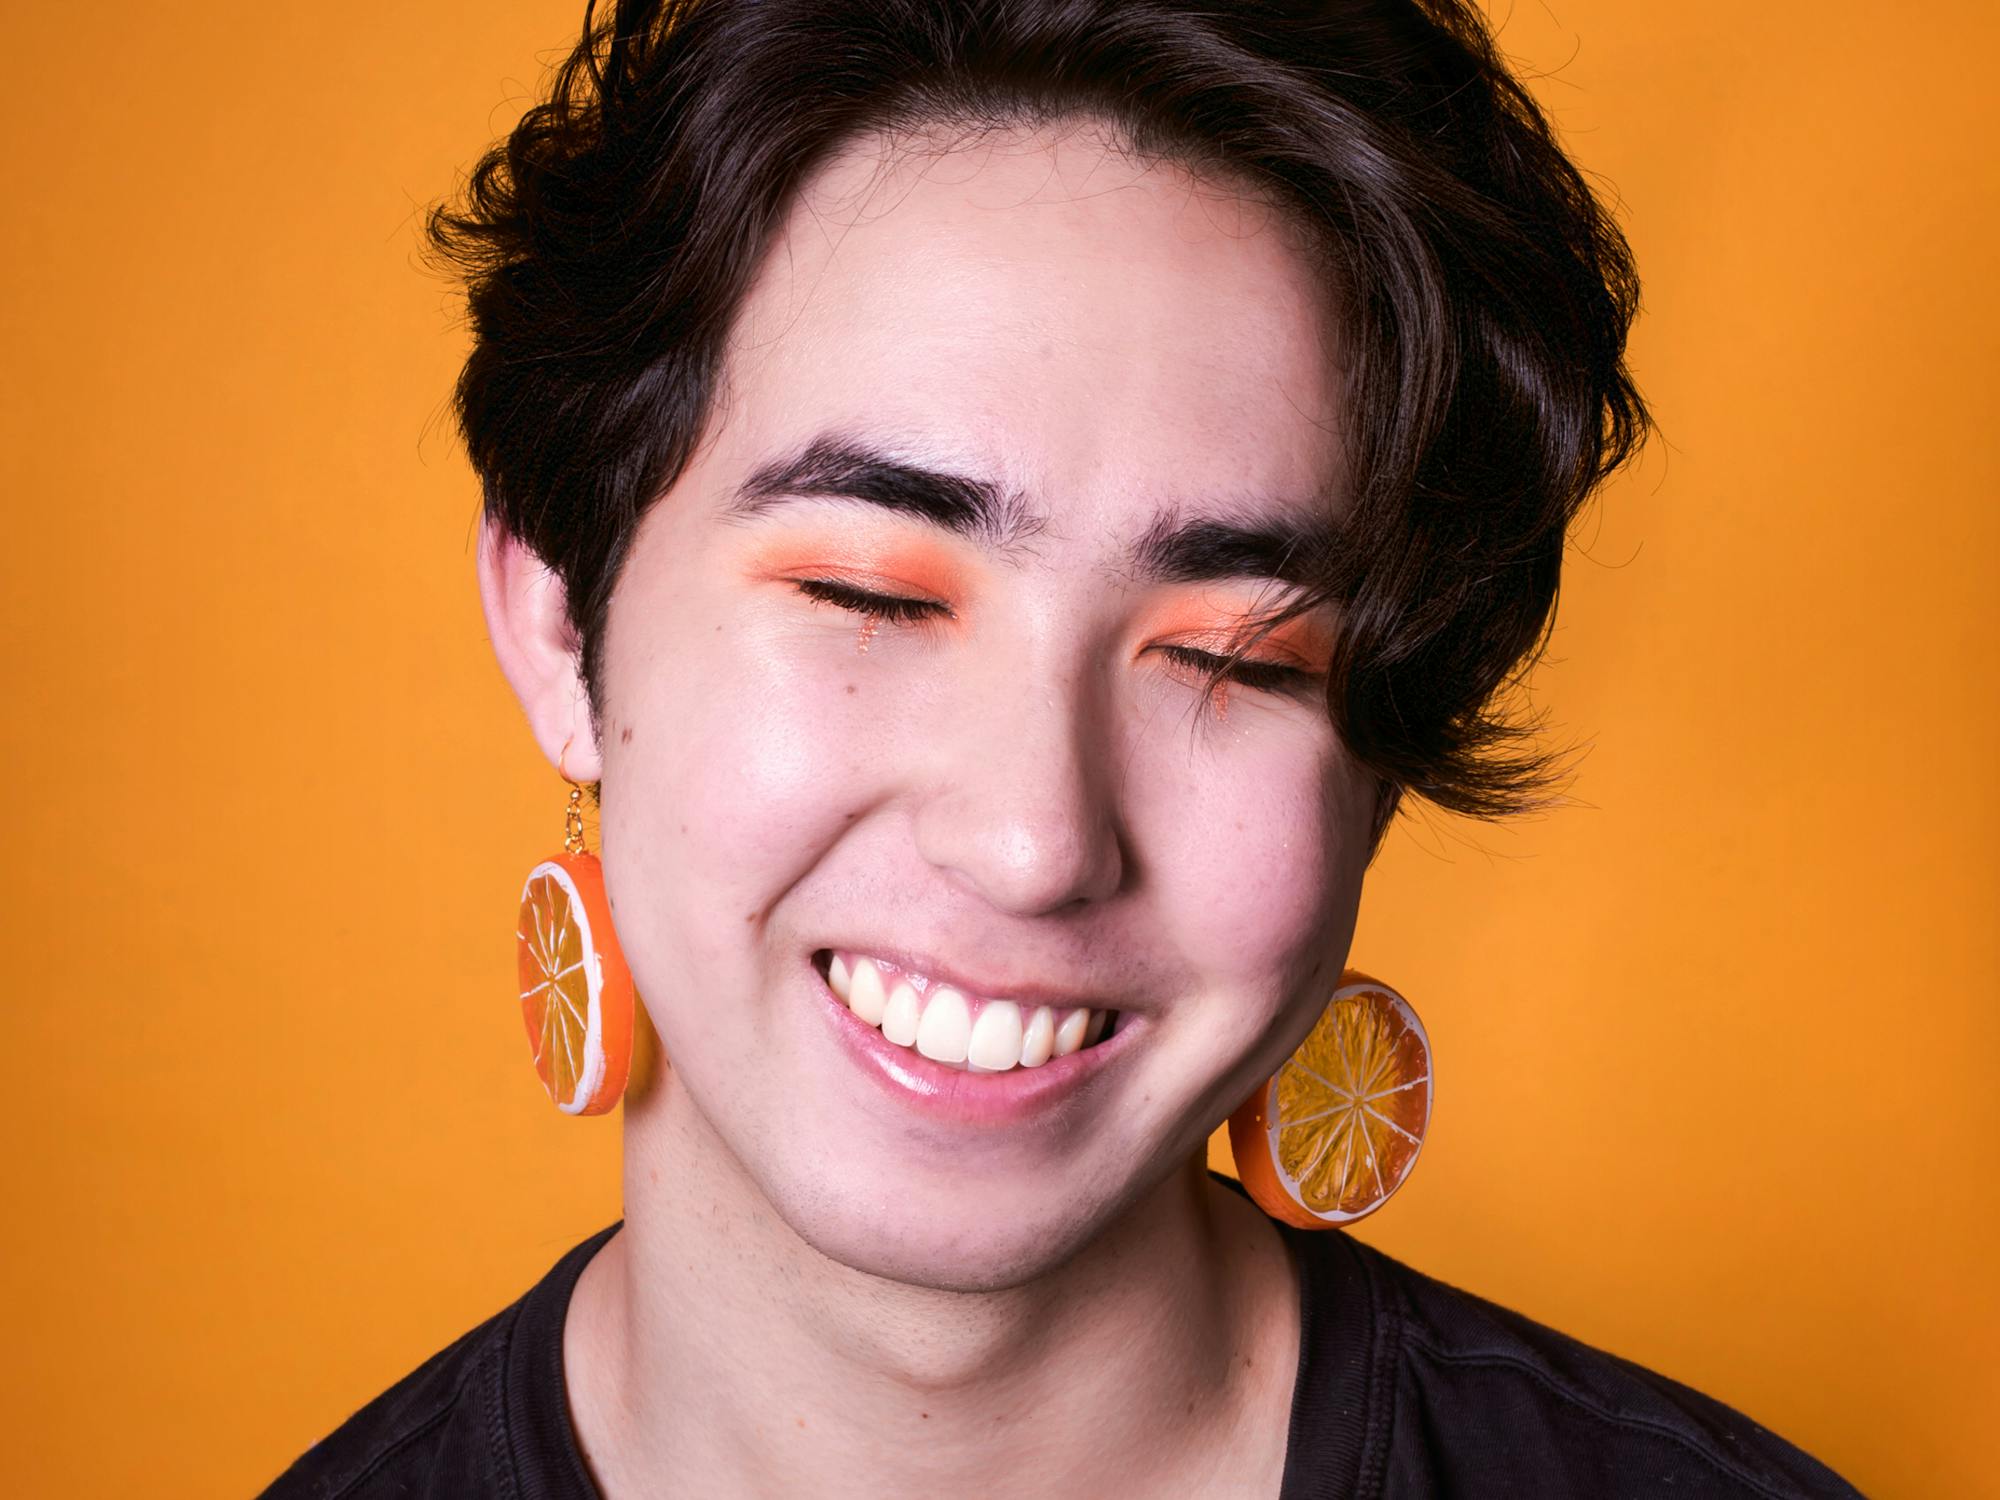 Set against an orange background, a young man with orange earrings and orange eyeshadow smiles with eyes closed